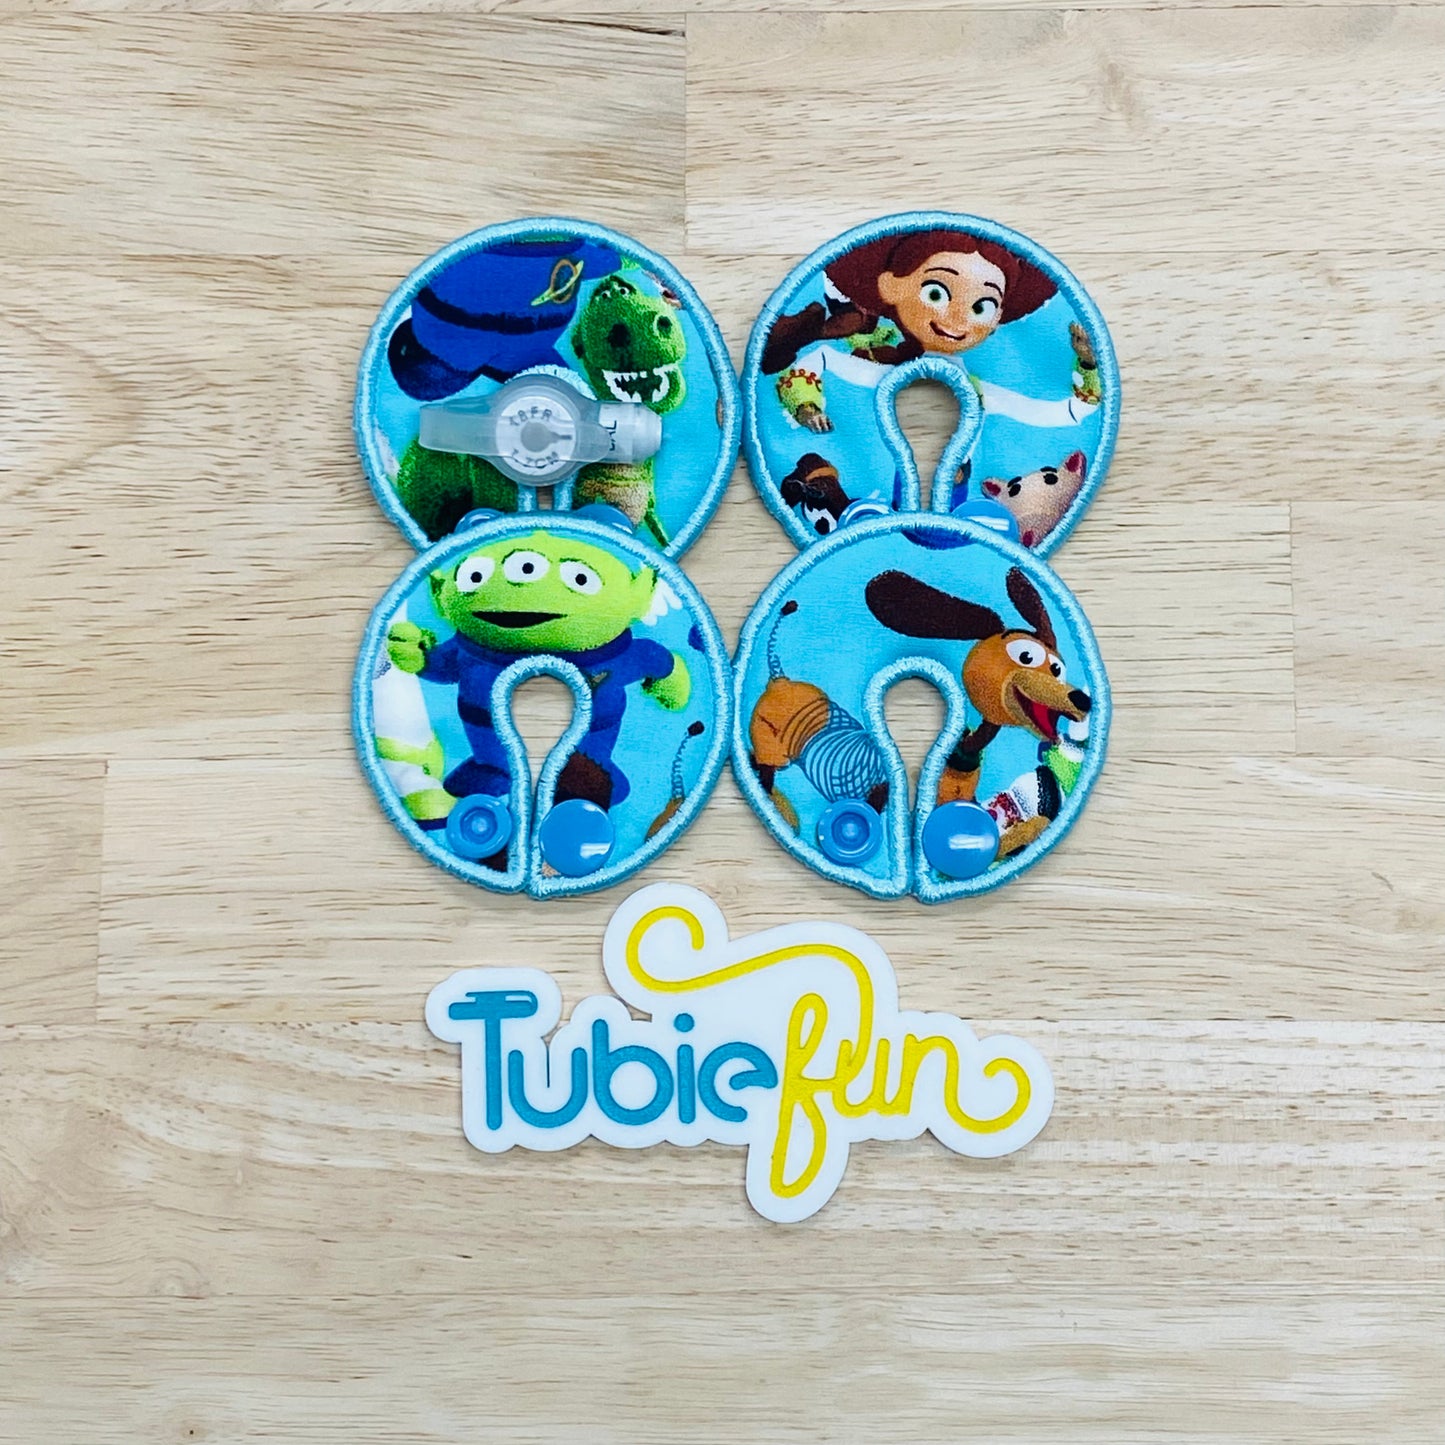 G-Tube Button Pad Cover - Toy Story